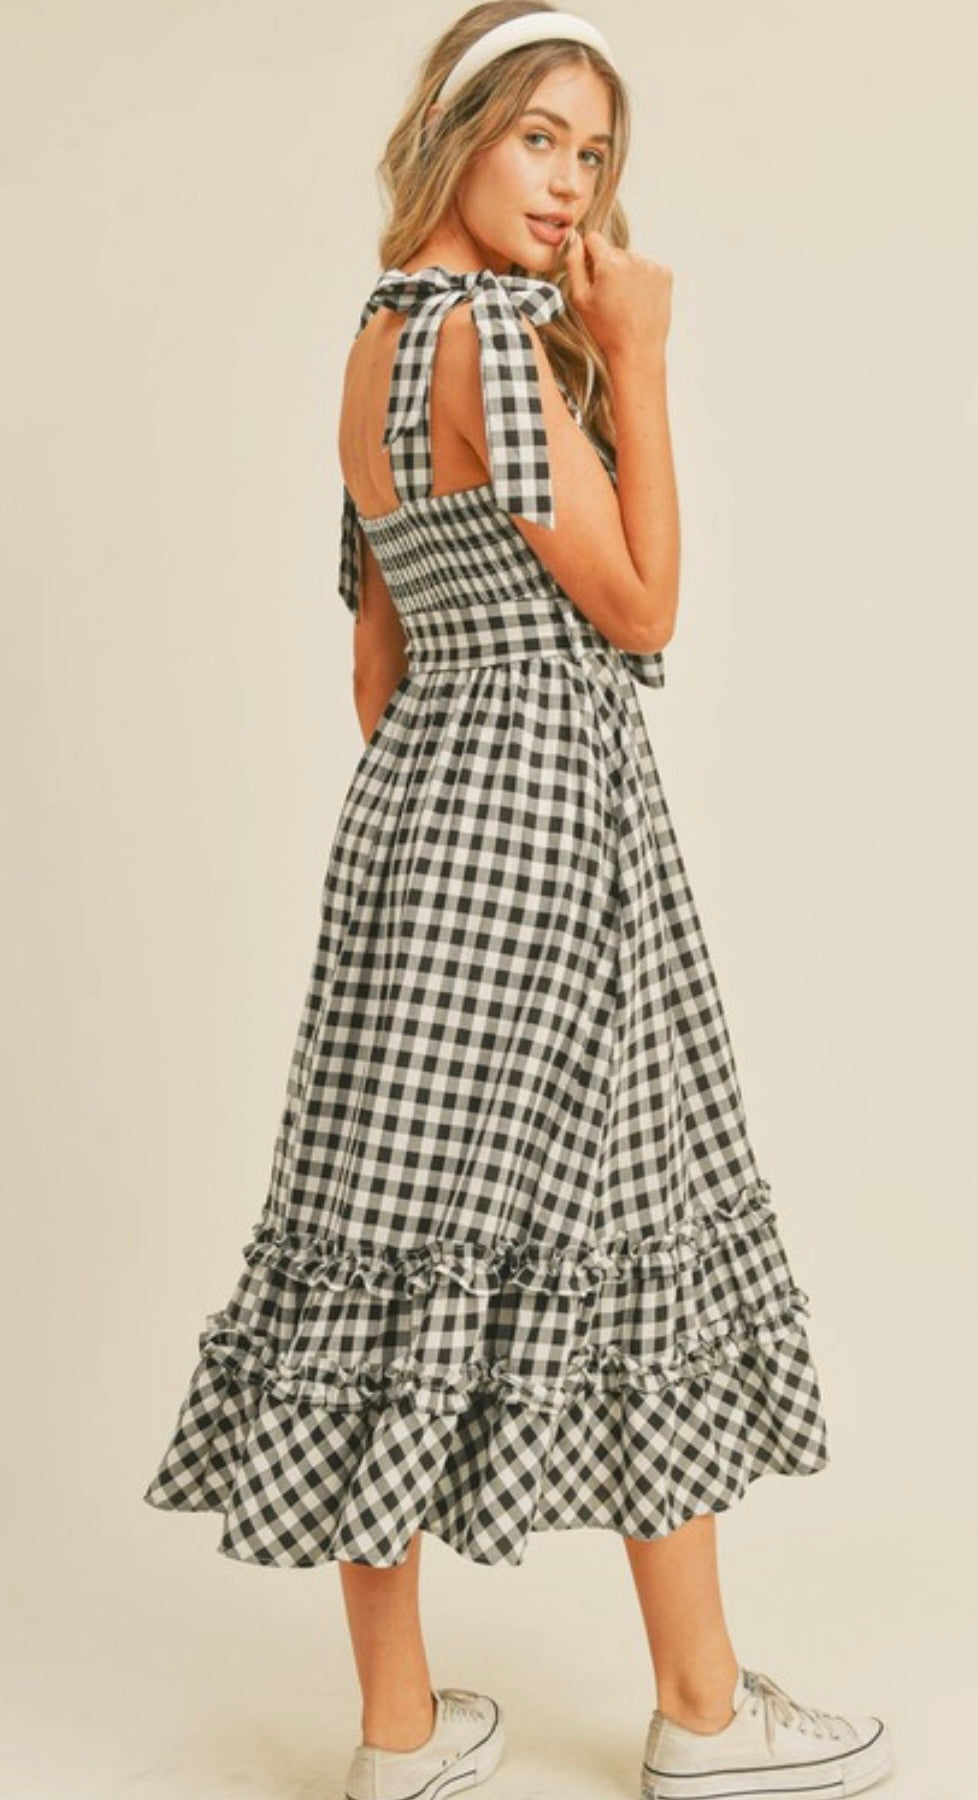 Check Her Out Gingham Dress